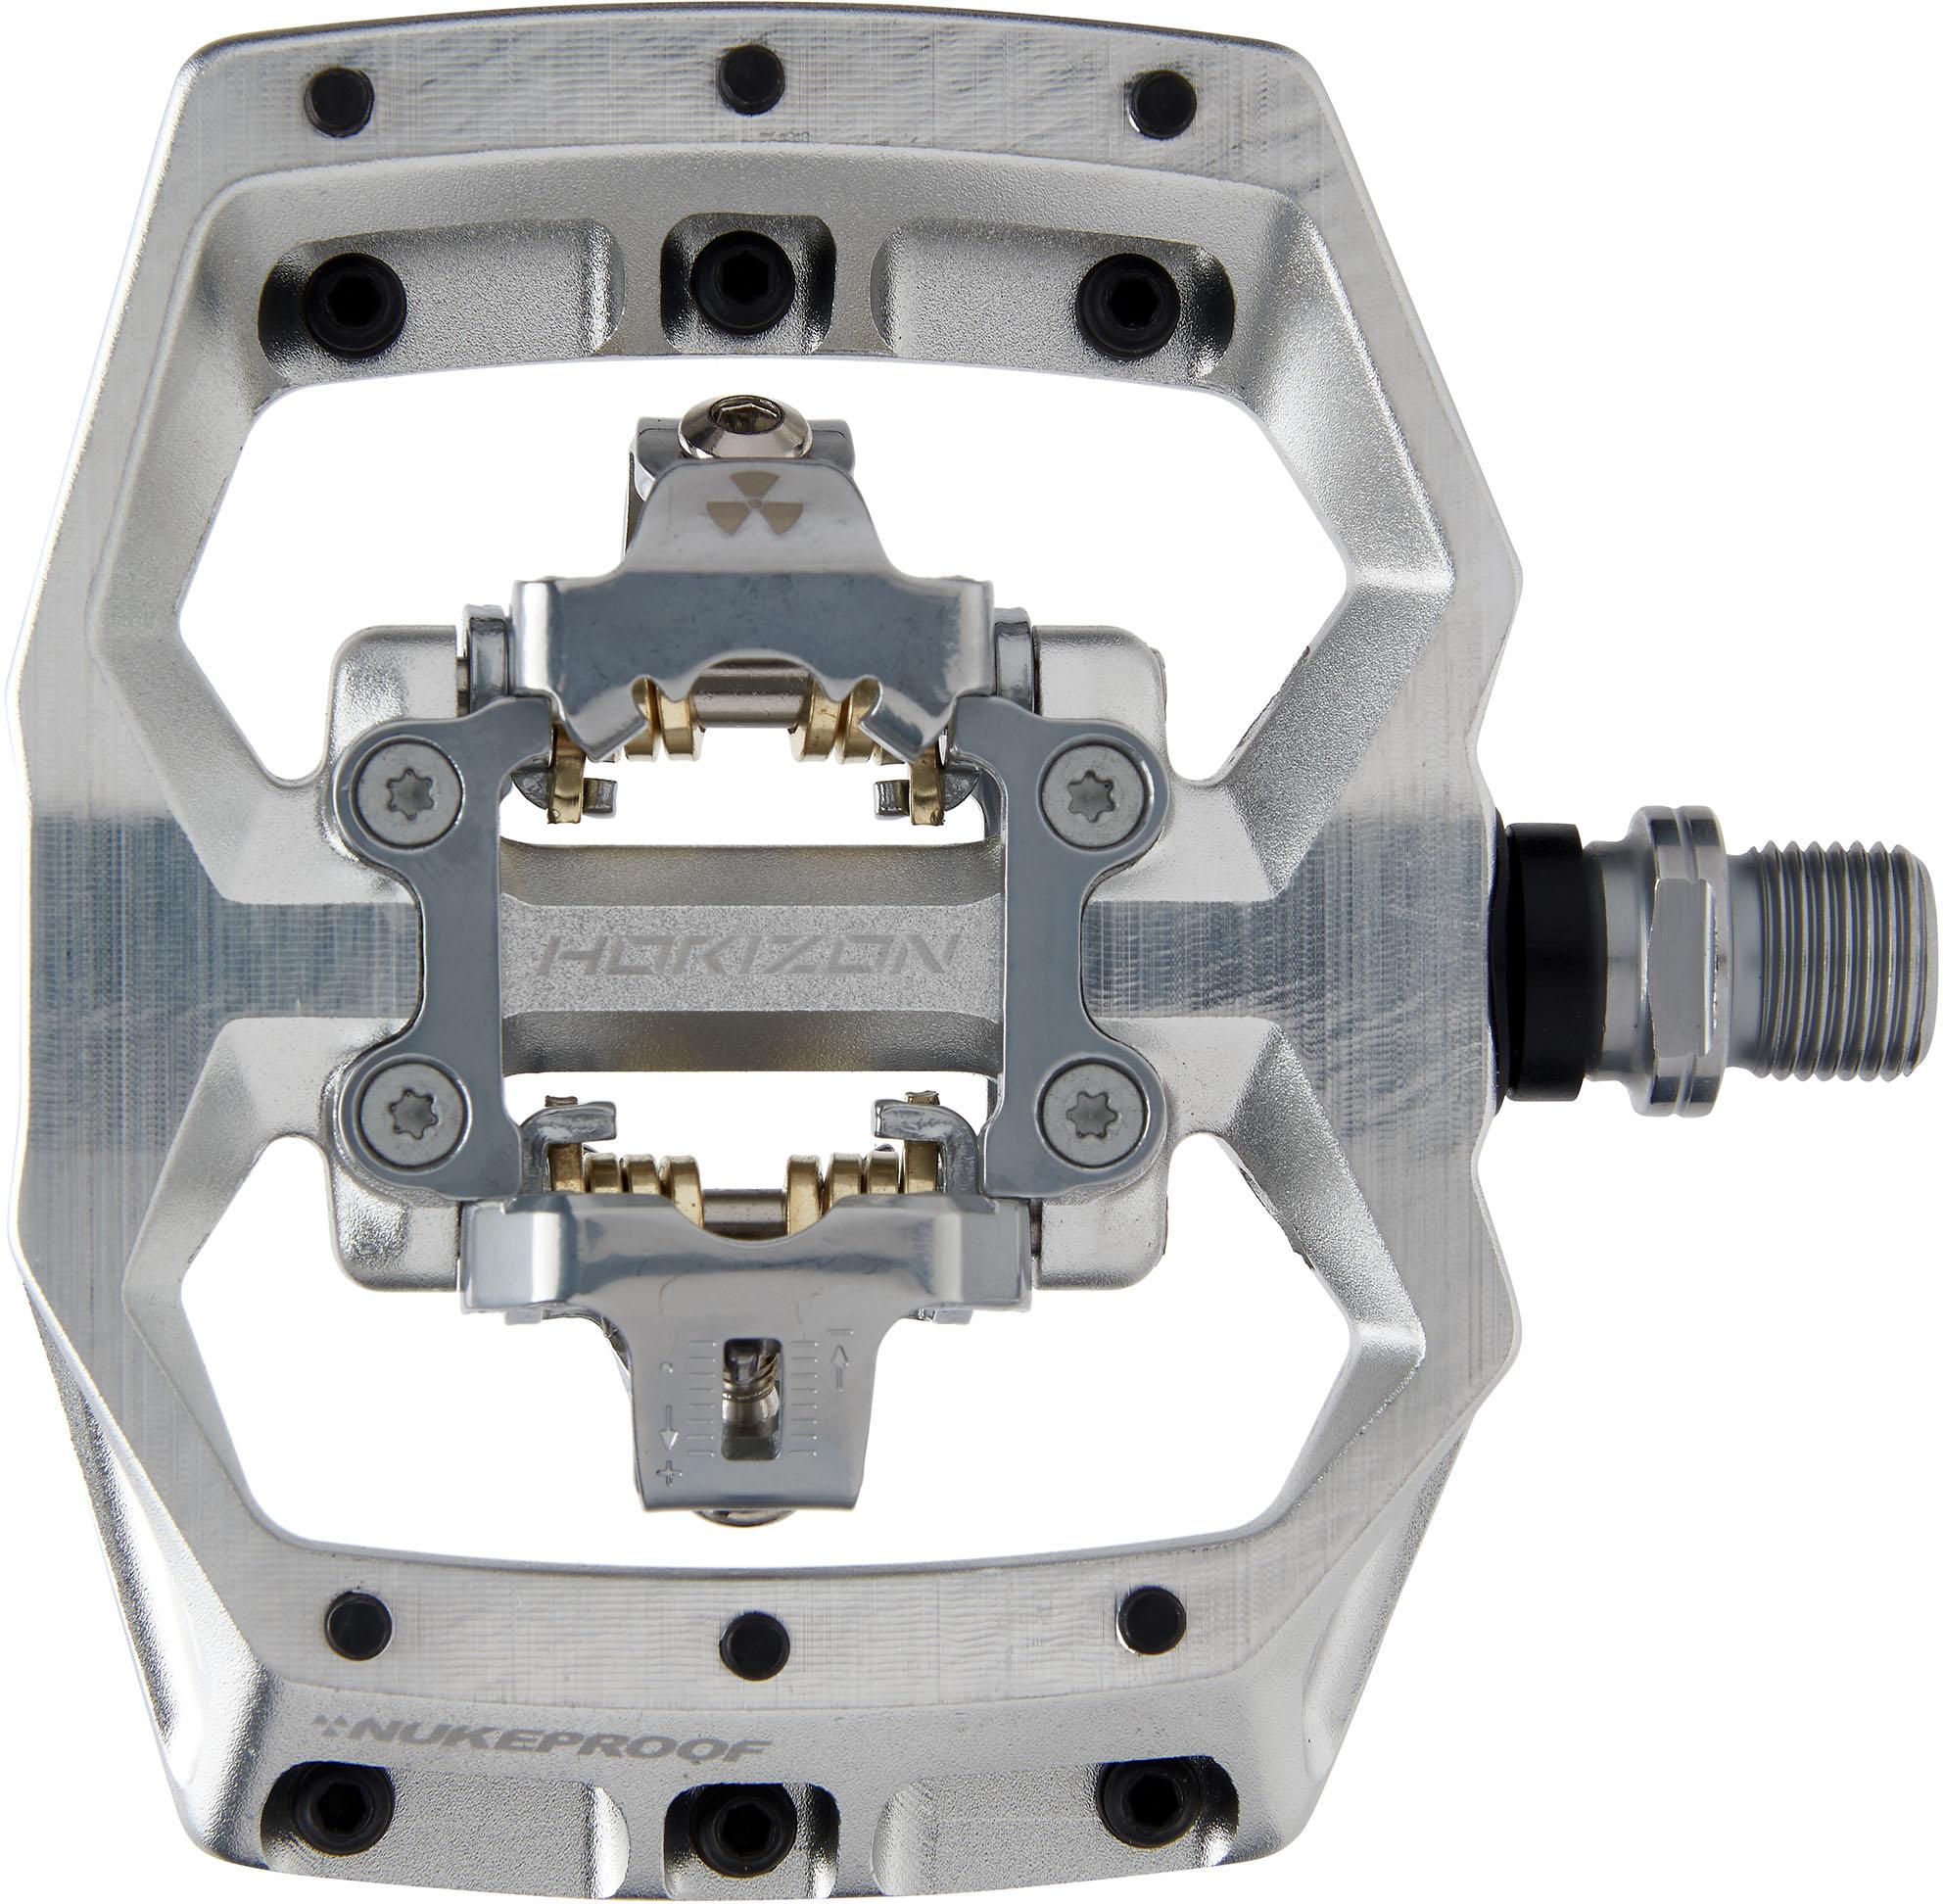 Nukeproof Horizon CL CrMo Downhill Pedals | Wiggle